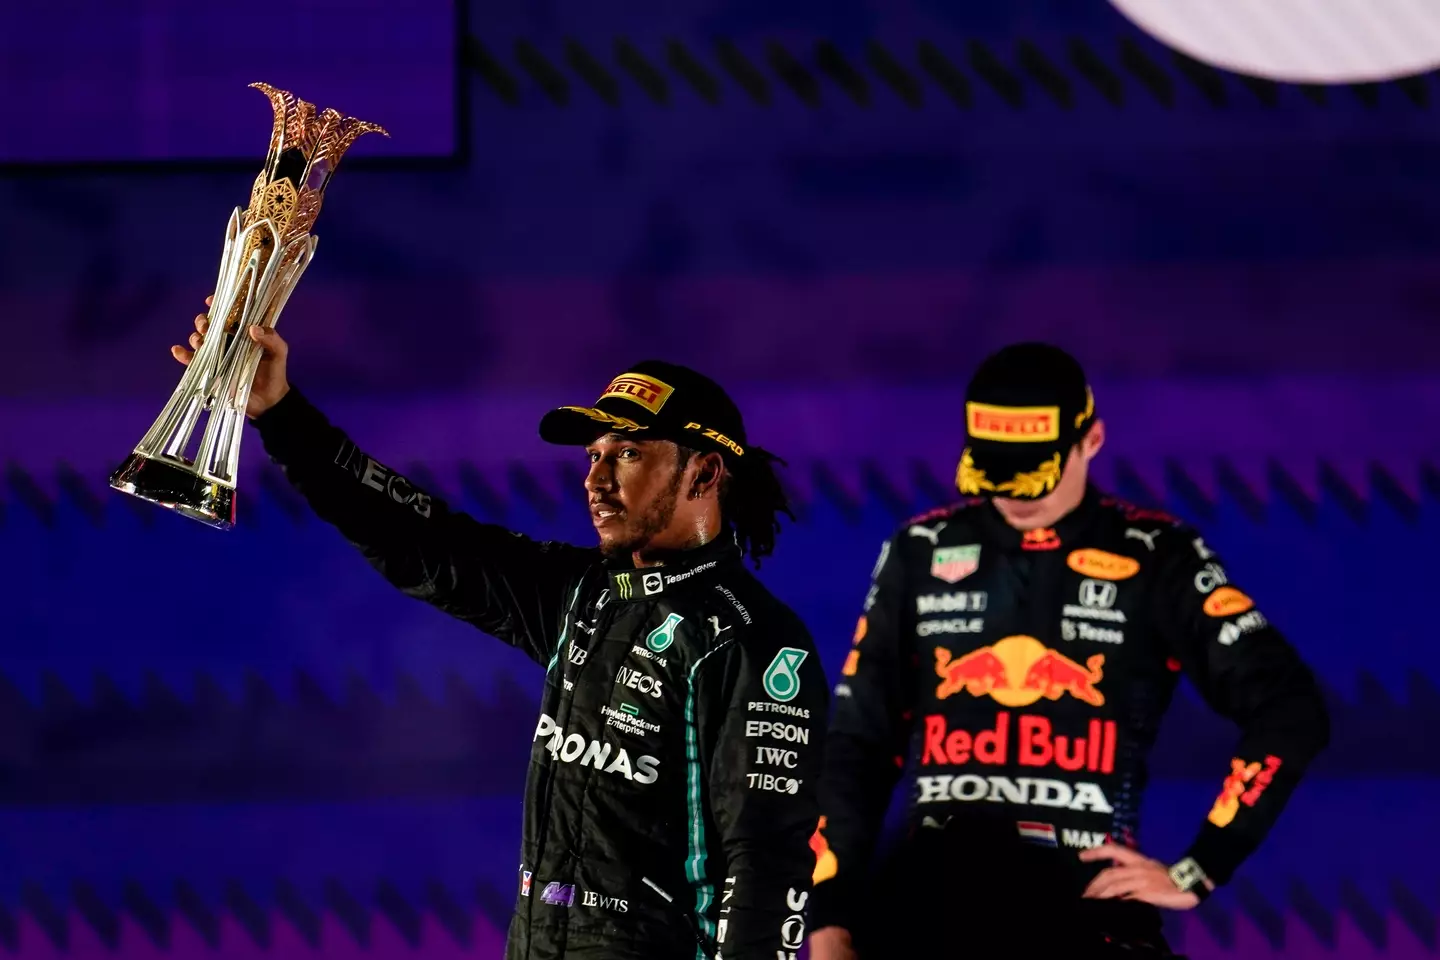 Hamilton celebrates in Saudi Arabia but Verstappen was very unhappy with the result. Image: PA Images